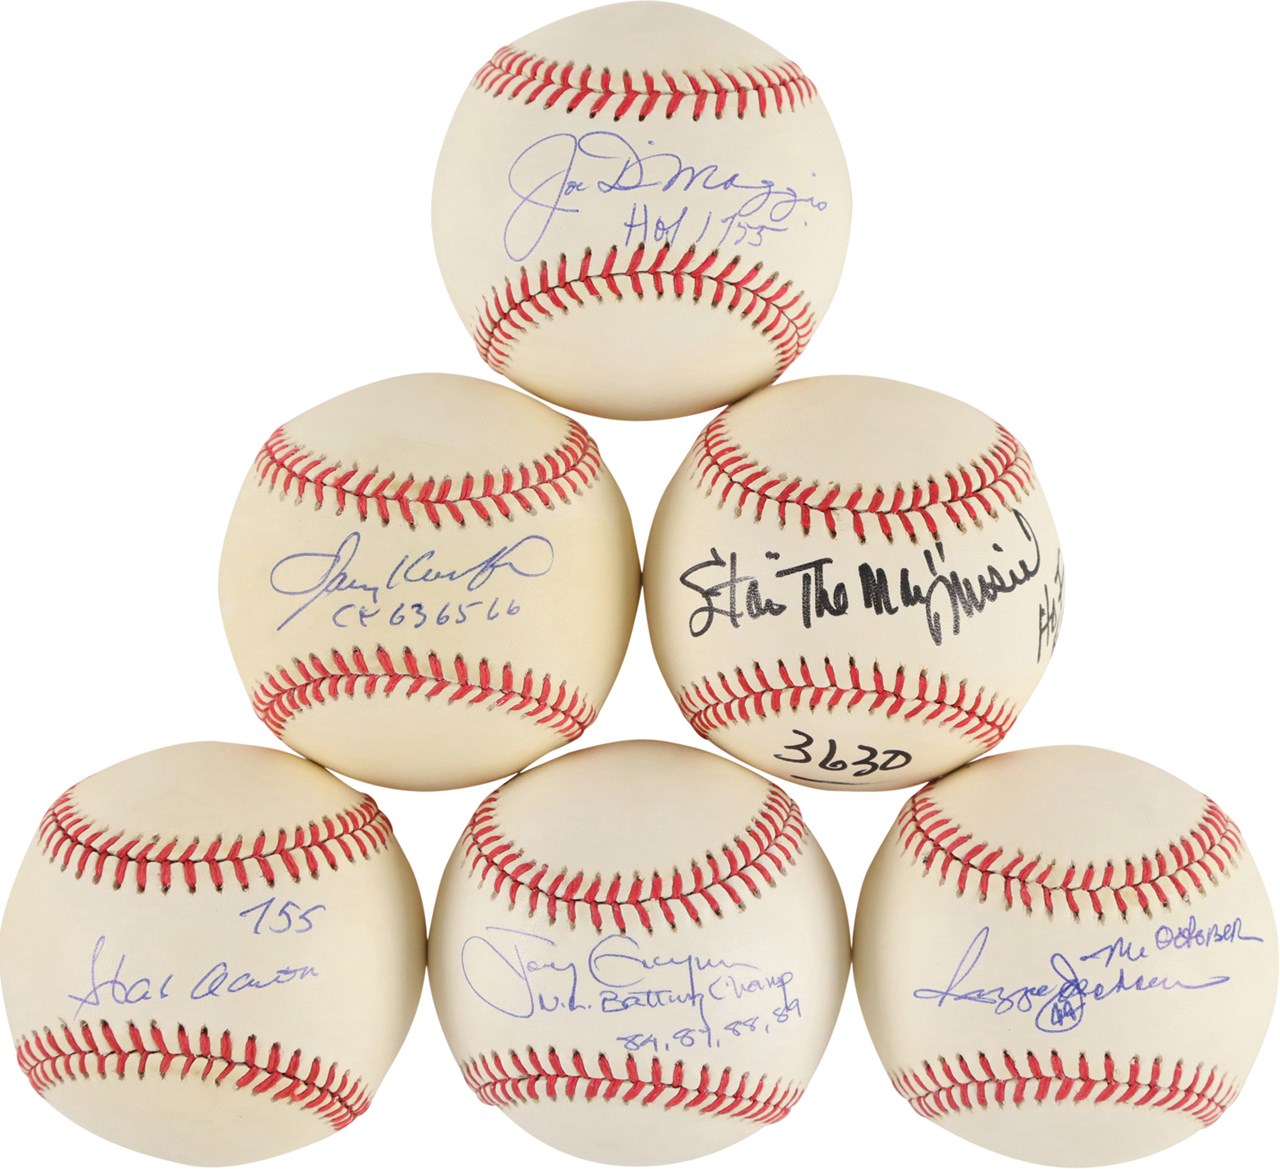 Hall of Fame "Special Inscription" Single Signed Baseball Collection (15) w/Aaron, DiMaggio, and Koufax